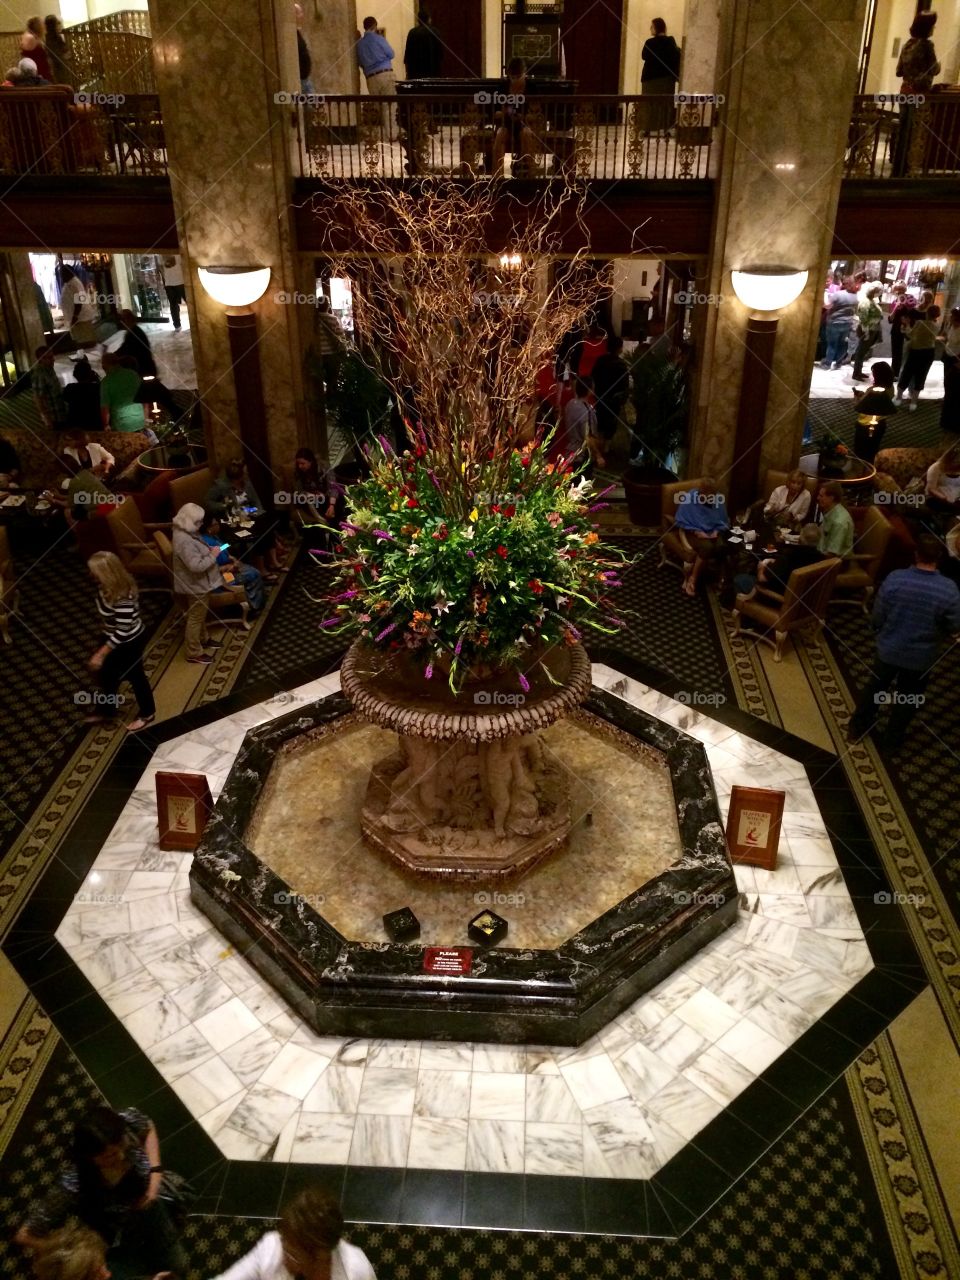 Fountain in the Peabody hotel lobby in Memphis, Tennessee 